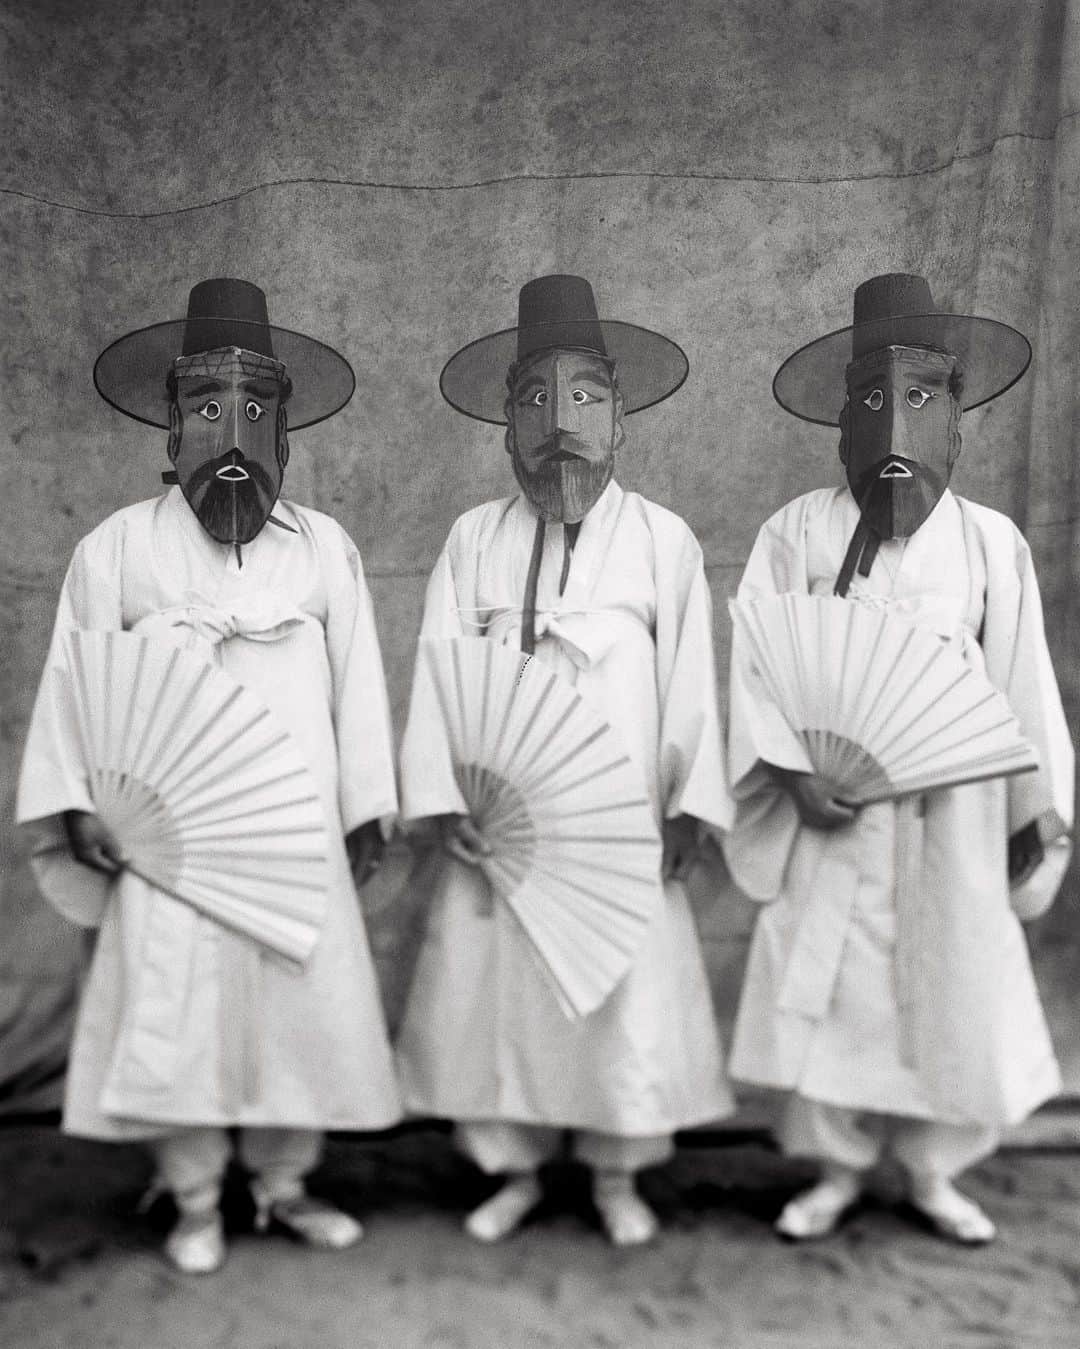 C E R E A Lのインスタグラム：「Talchum - Korean folk dancers, by photographer Koo Bohnchang.  From Cereal Volume 19 — read more via the link in profile.」